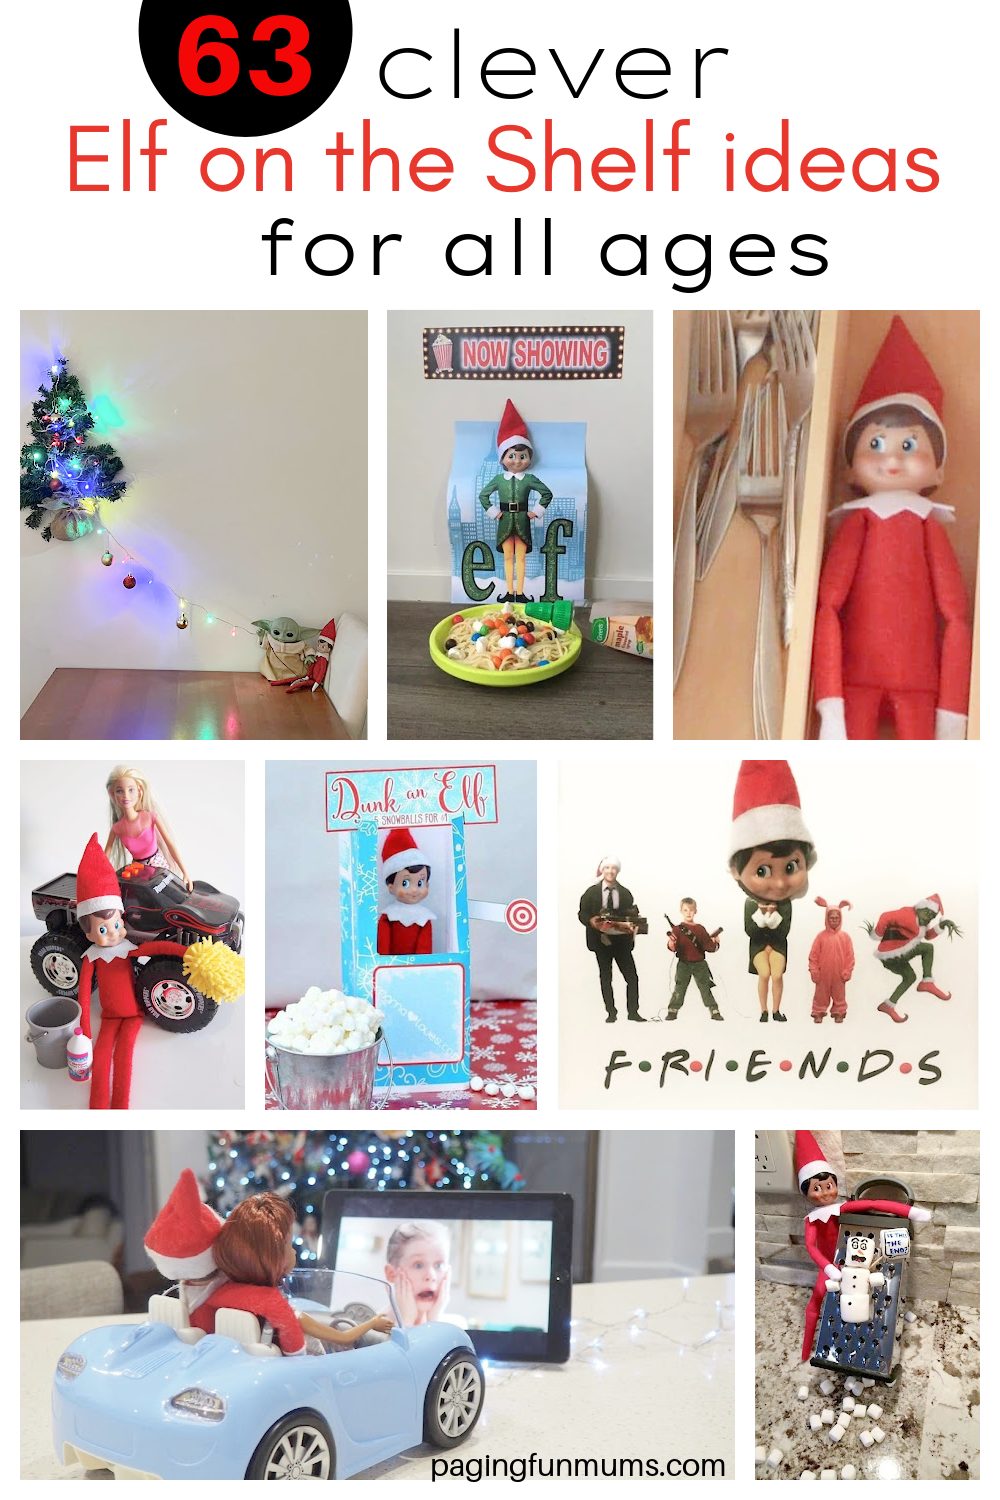 63 Clever Elf on the Shelf Ideas for all ages - Paging Fun Mums